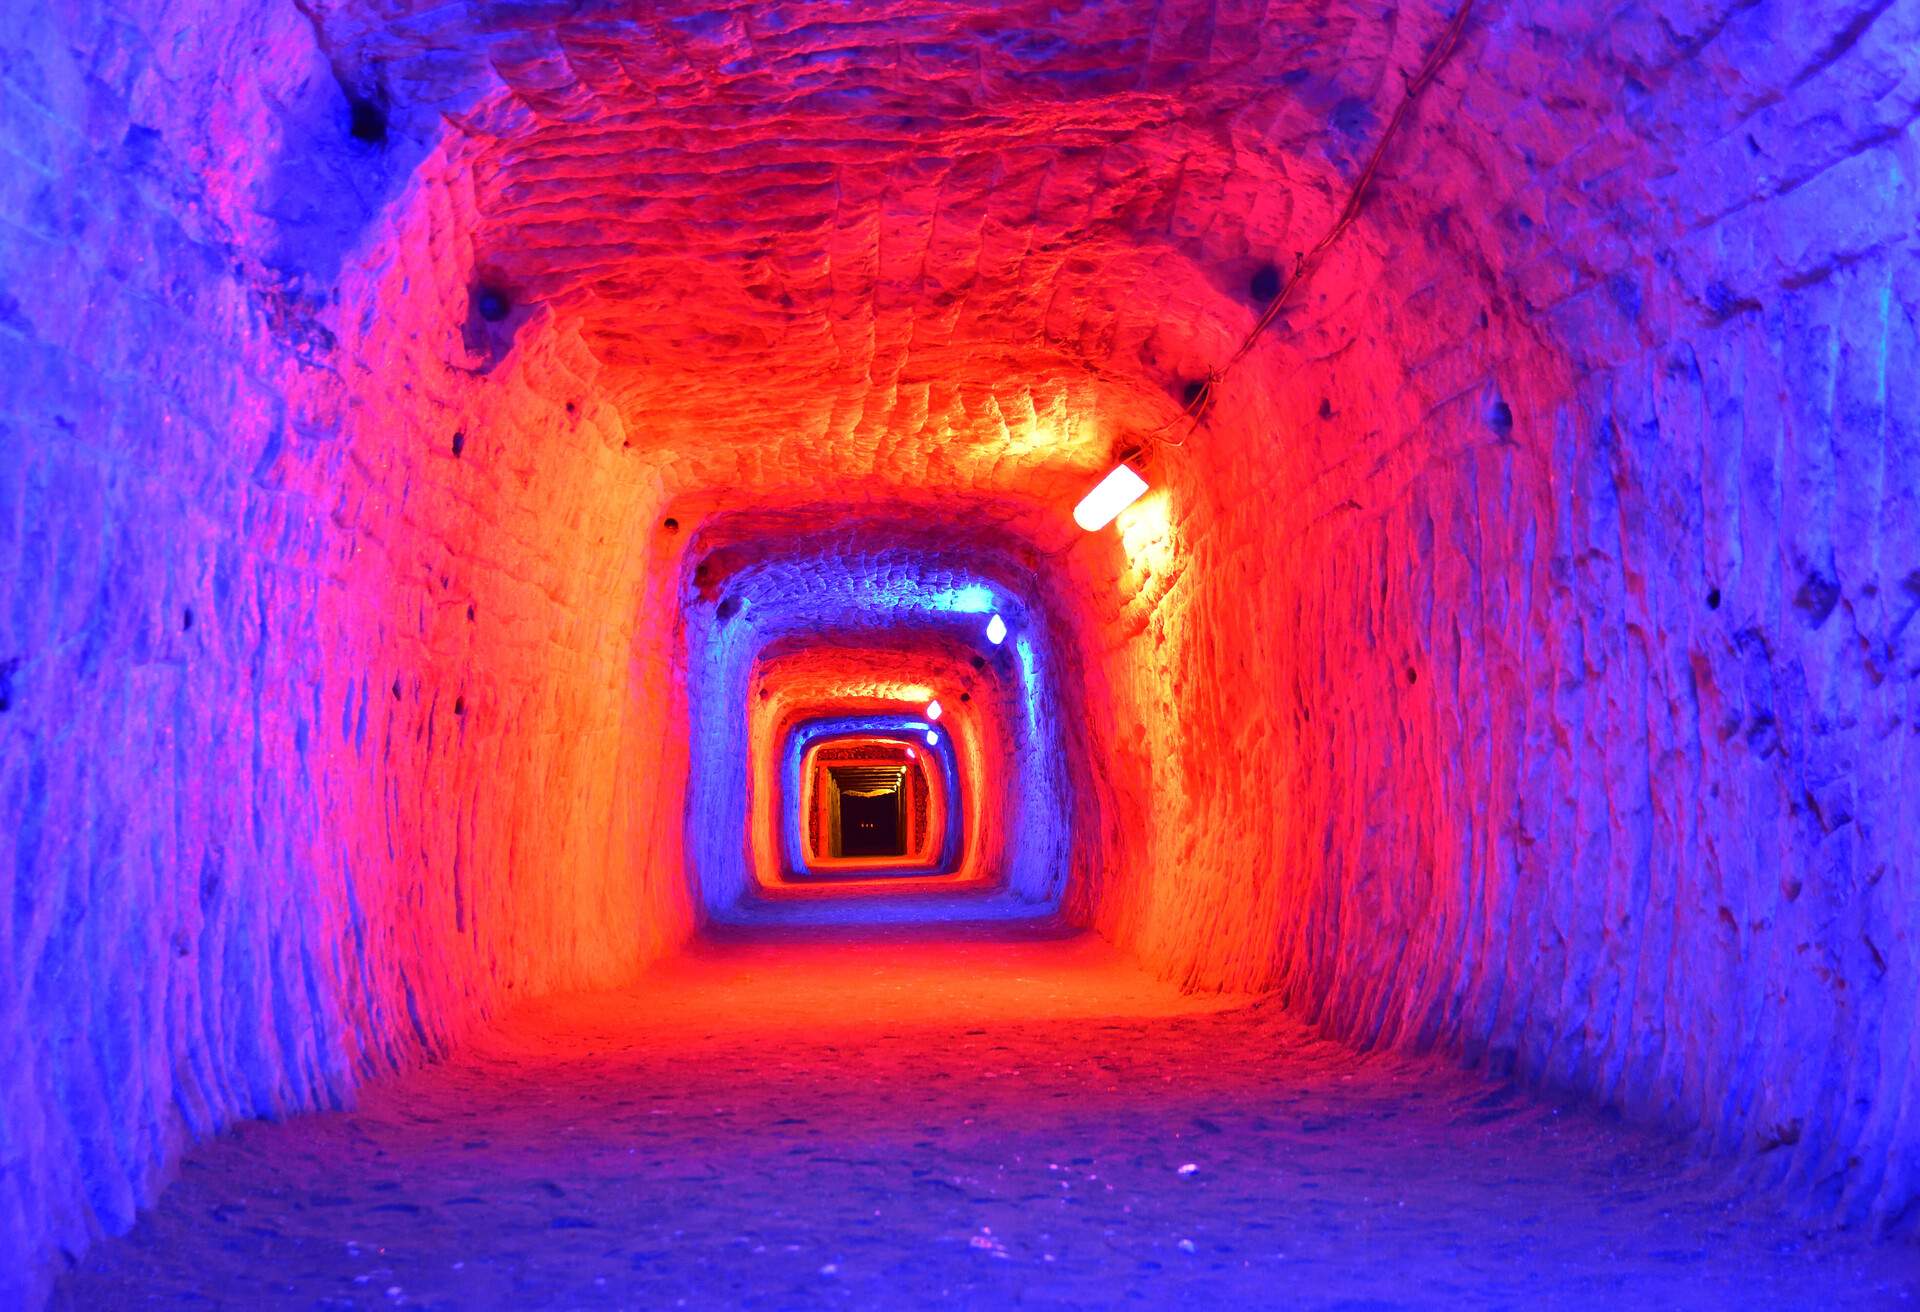 Highlighted with colour lamps underground salt mine working
